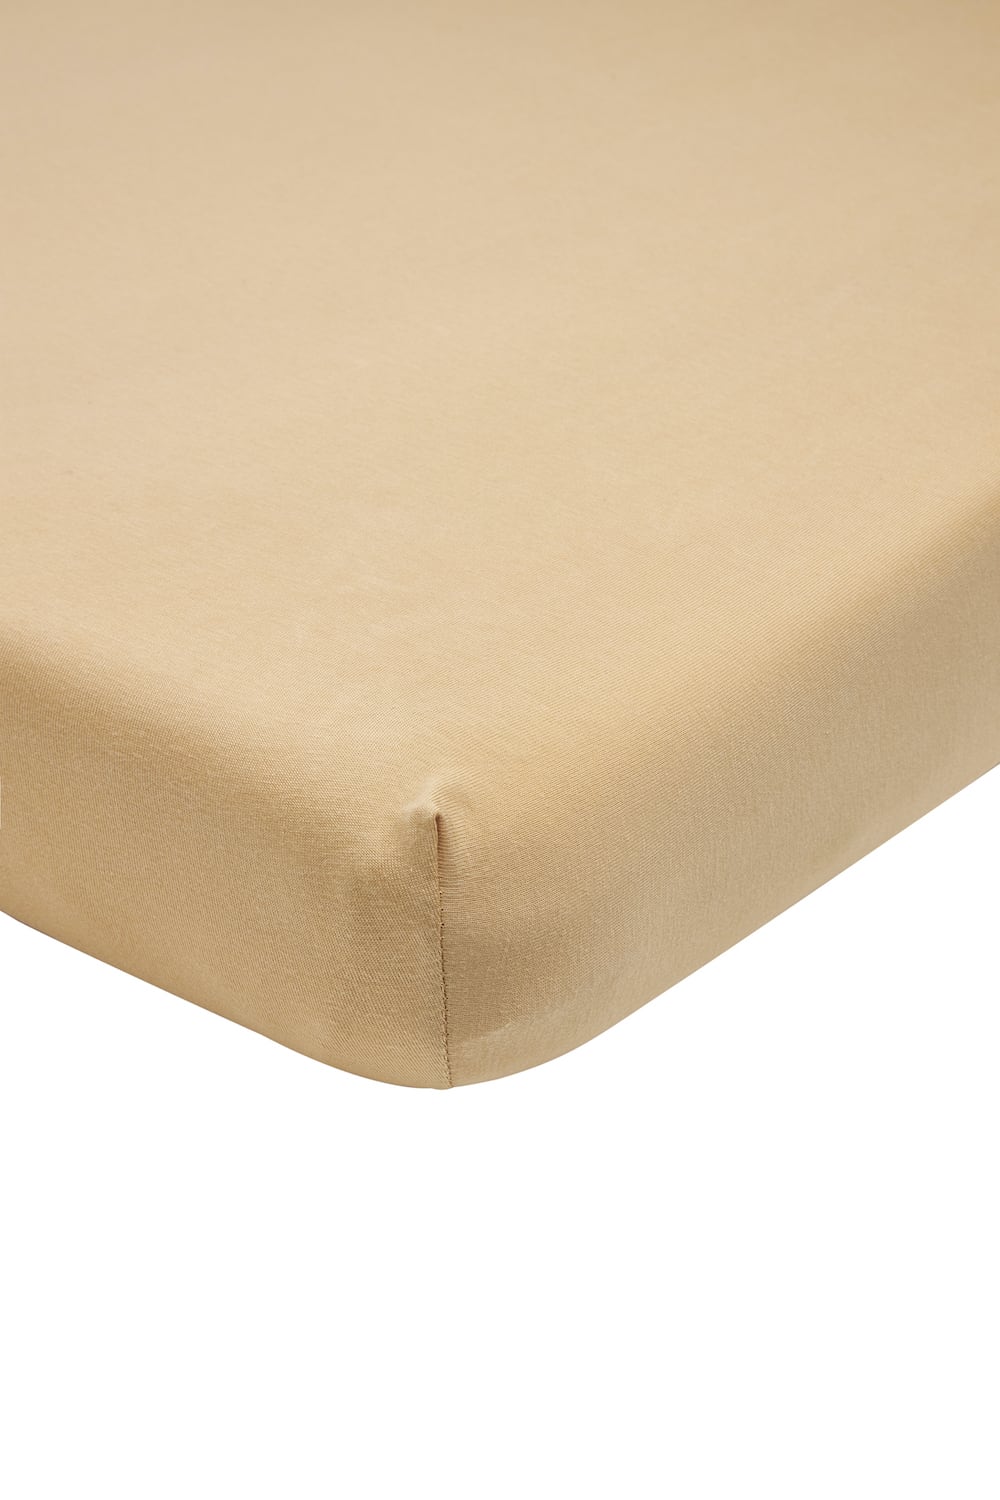 Hoeslaken 1-persoons Basic Jersey Warm Sand (90x210/220cm)